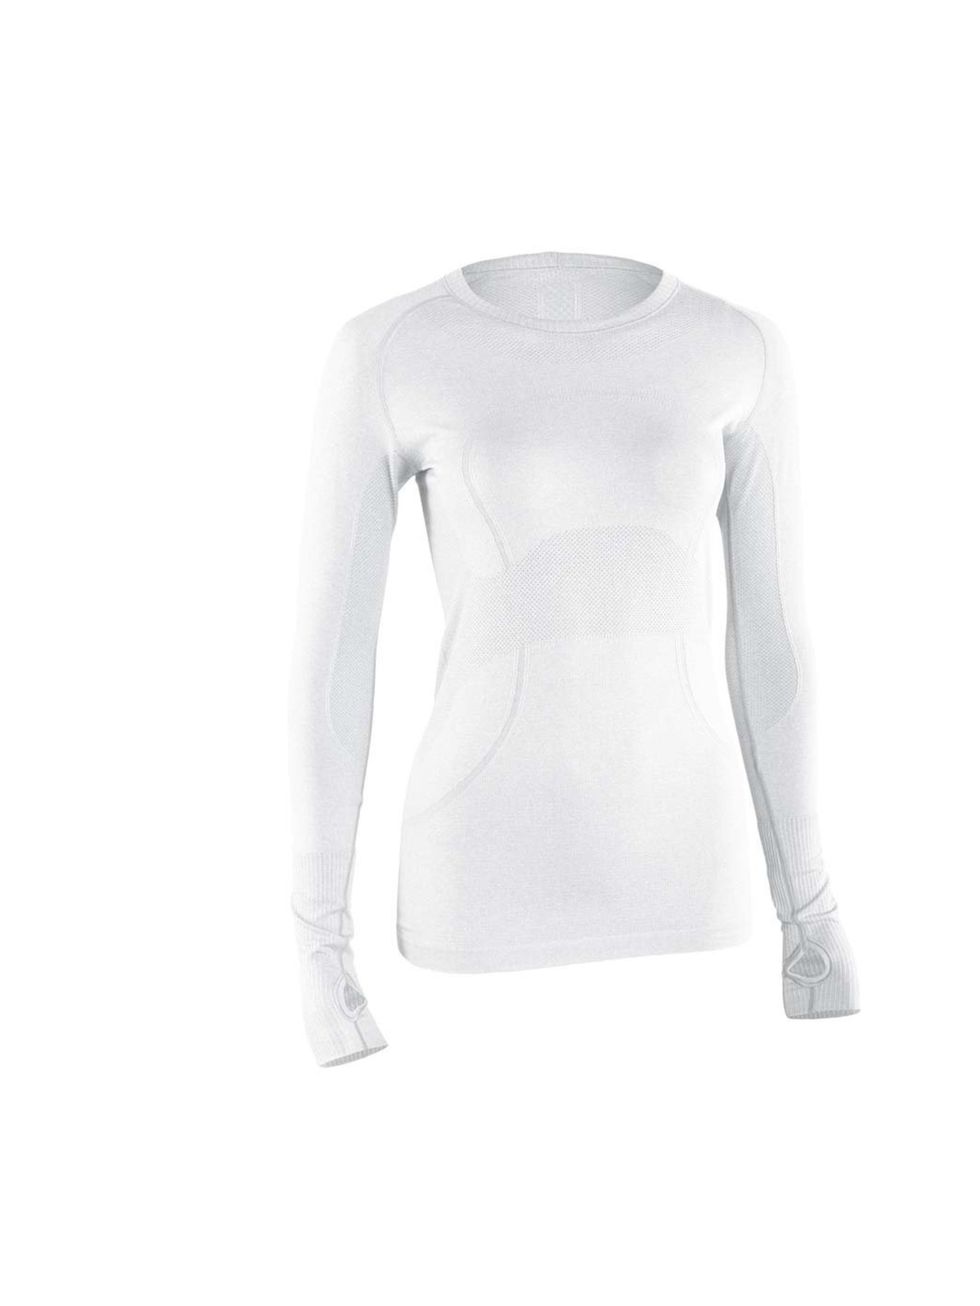 <p>Lululemon's long-sleeve tee is perfect for layering, and we love the thumbholes that keep sleeves down.<a href="http://www.lululemon.co.uk/products/clothes-accessories/run/Run-Swiftly-Tech-Long-Sleeve?cc=11345&skuId=uk_3515581&catId=run"> Run: Swiftly 